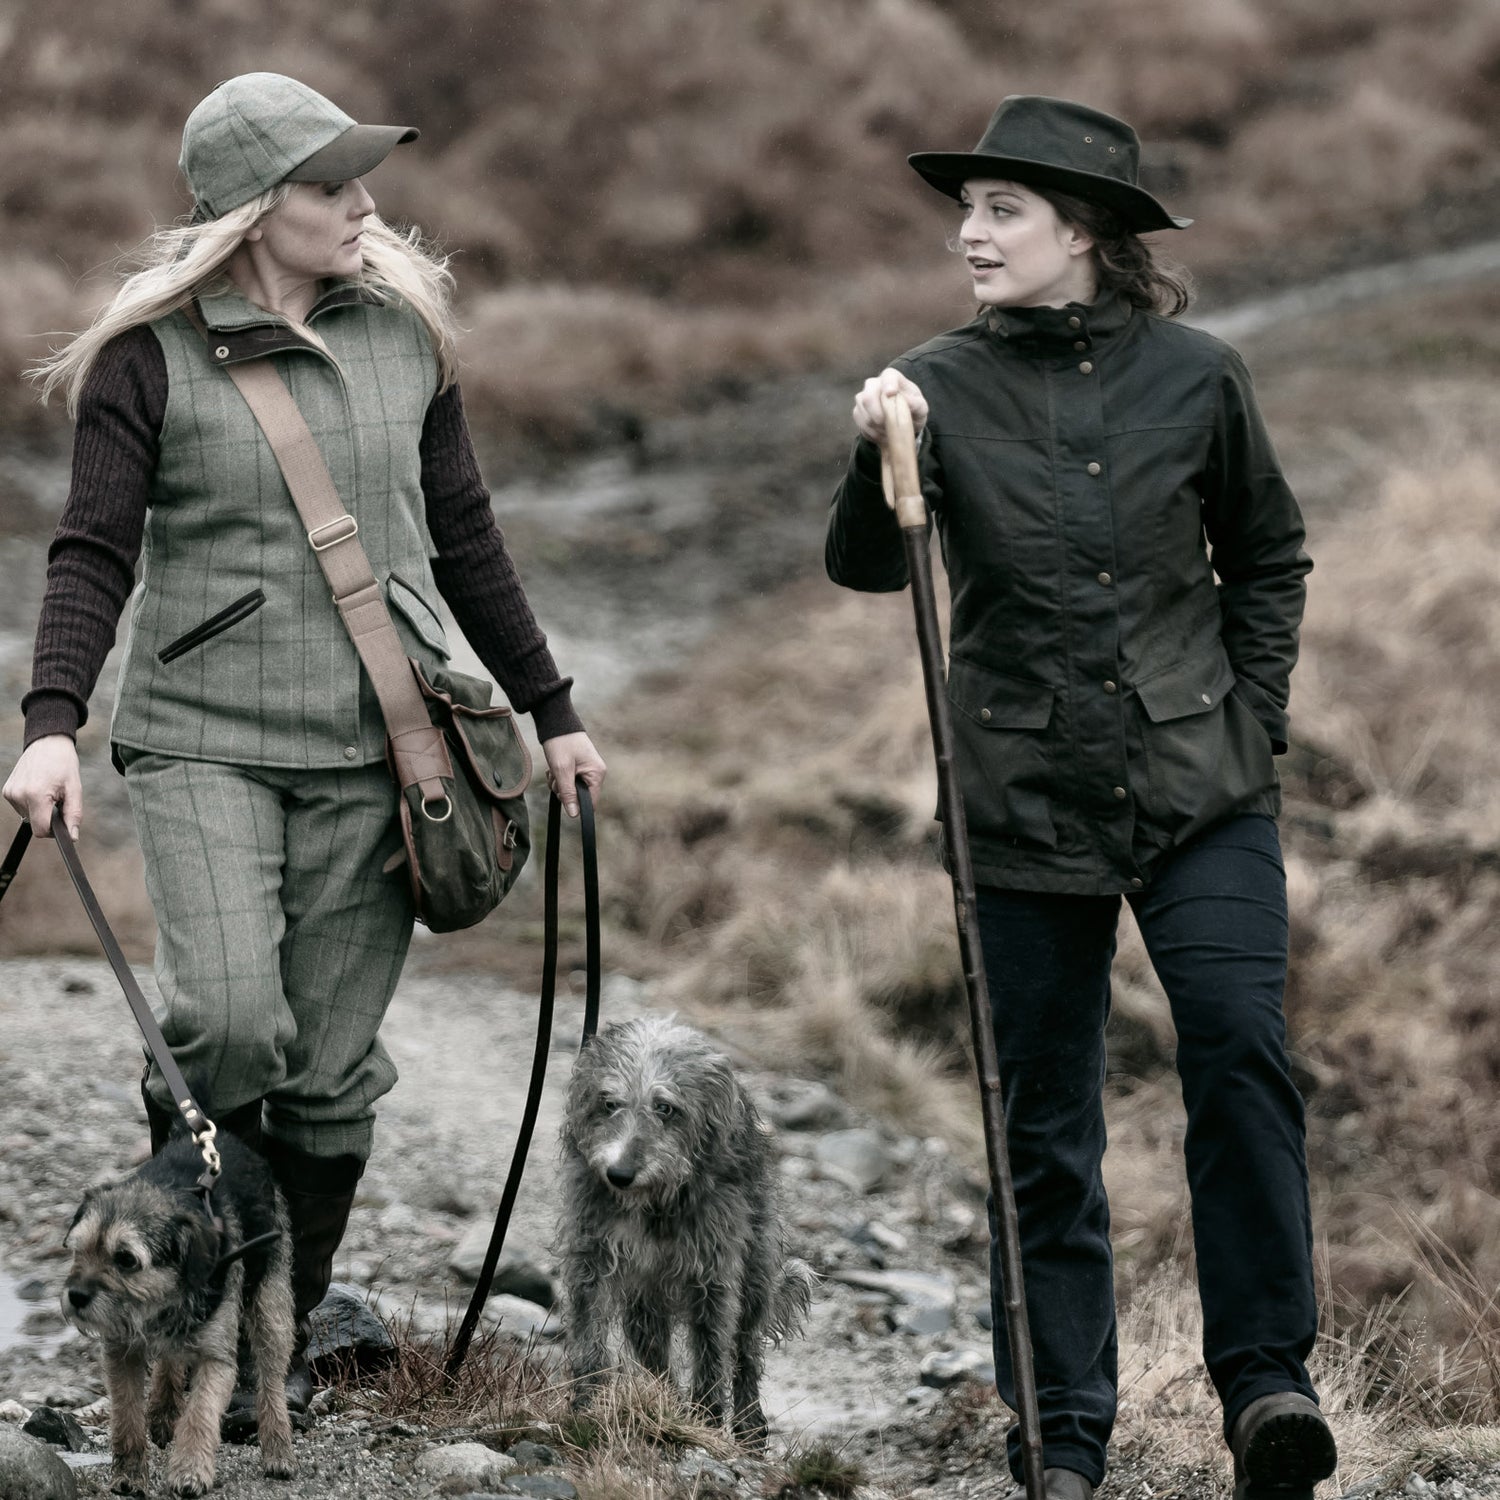 Womens Hats  New Forest Clothing